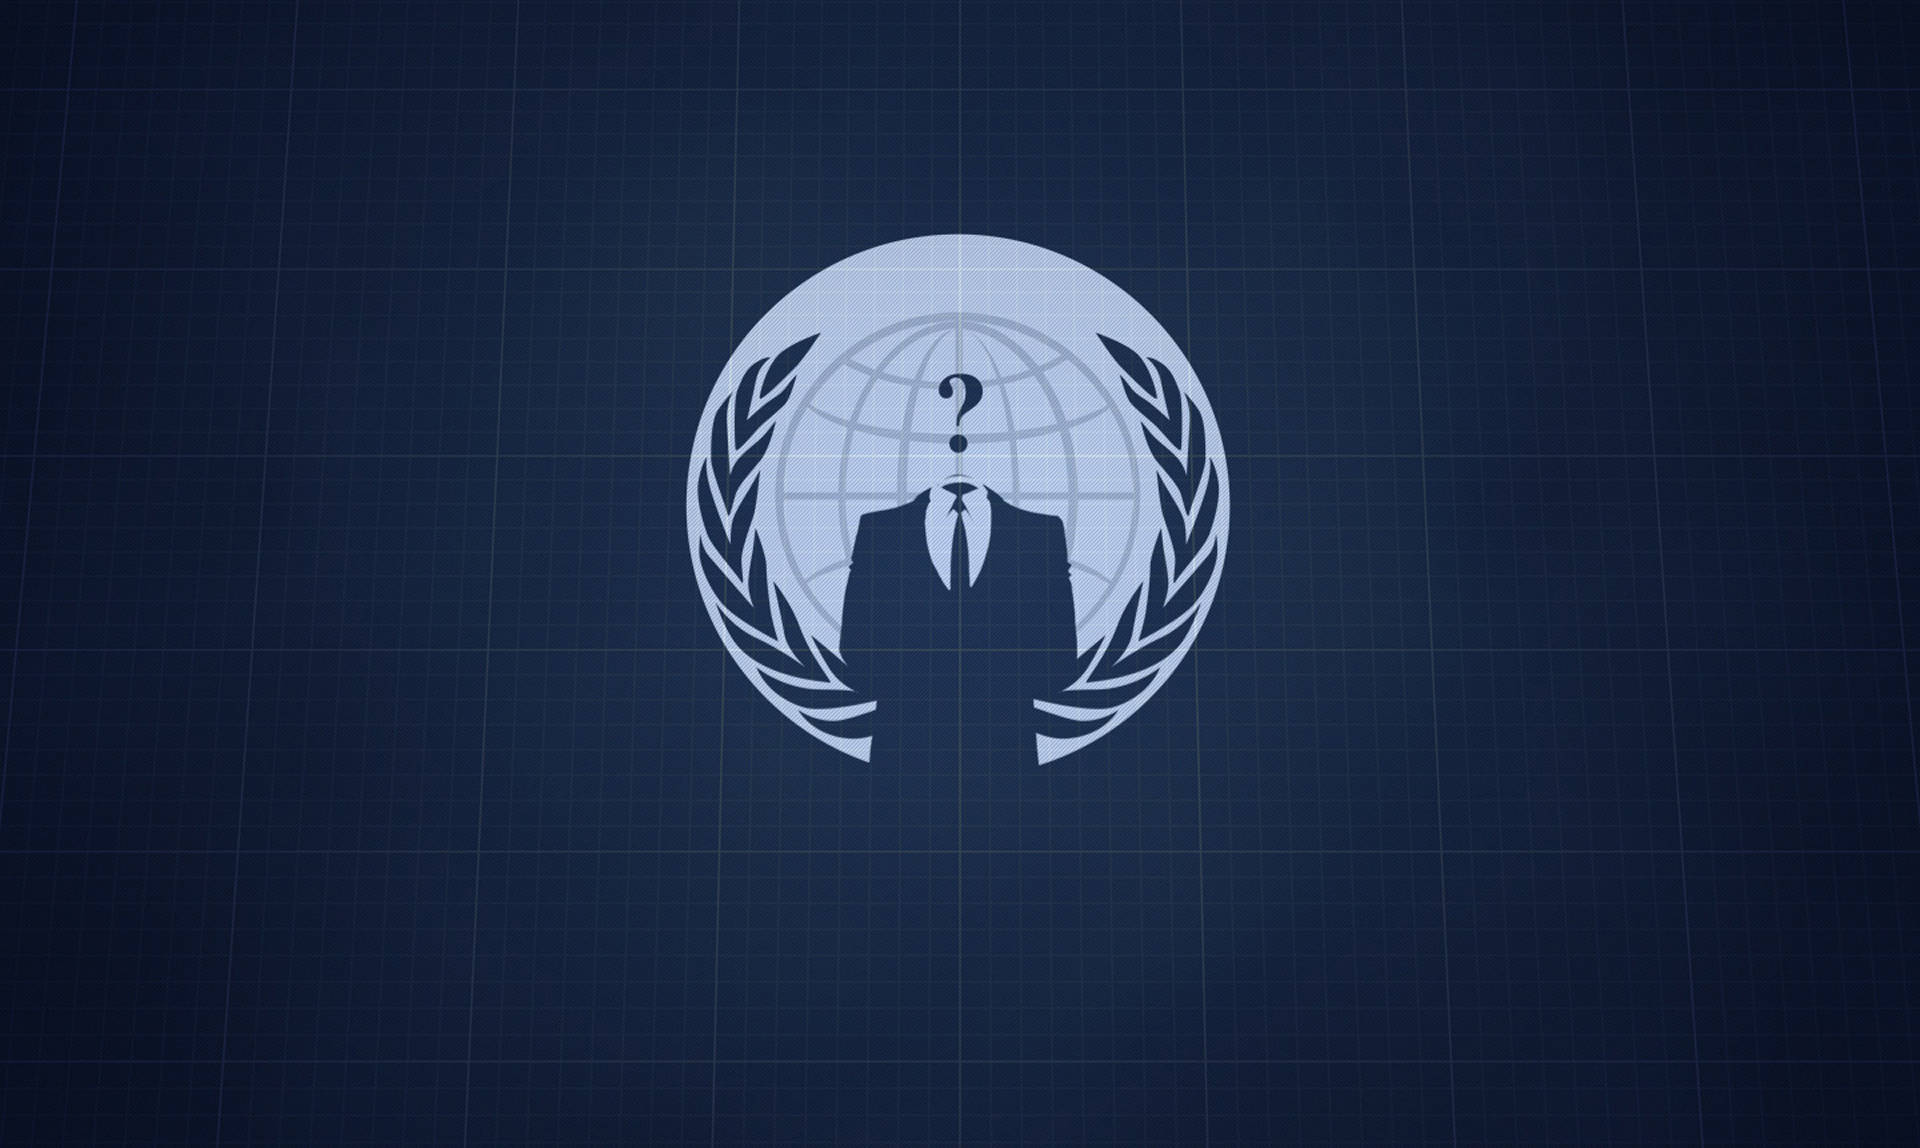 “anonymous Operation: Take Your Power Back” Background